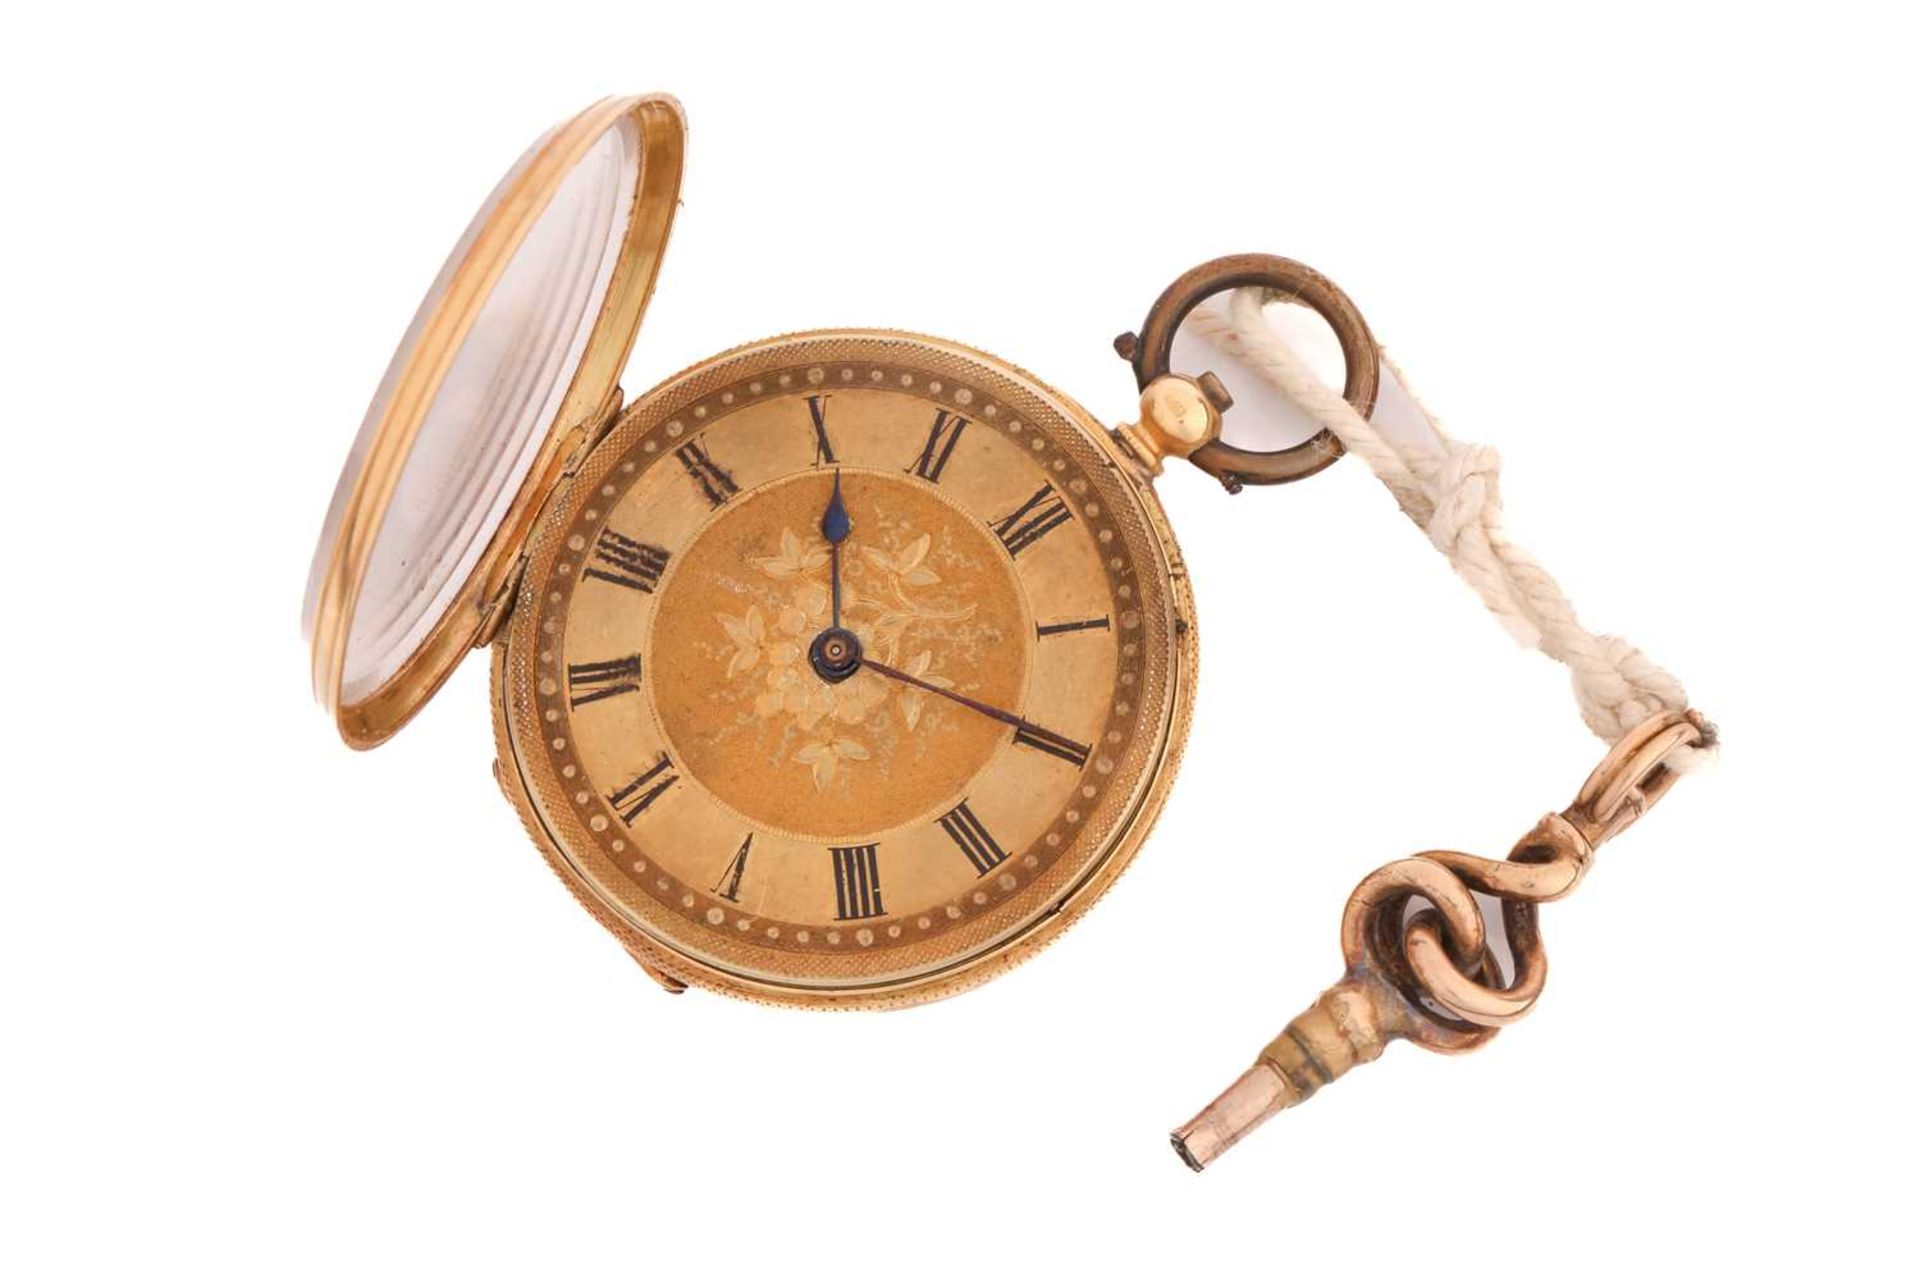 An gold open-faced lady's key wind fob watch with a jewelled bridge movement and matted and tooled